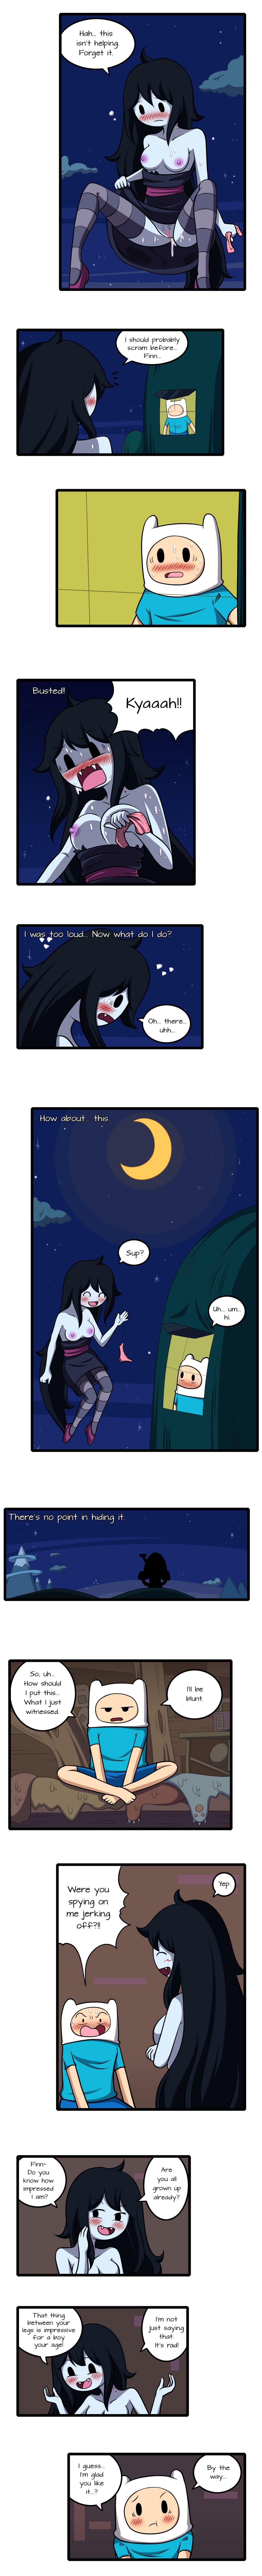 Deep Throat Adult Time 4 - Adventure time Porra - Page 6